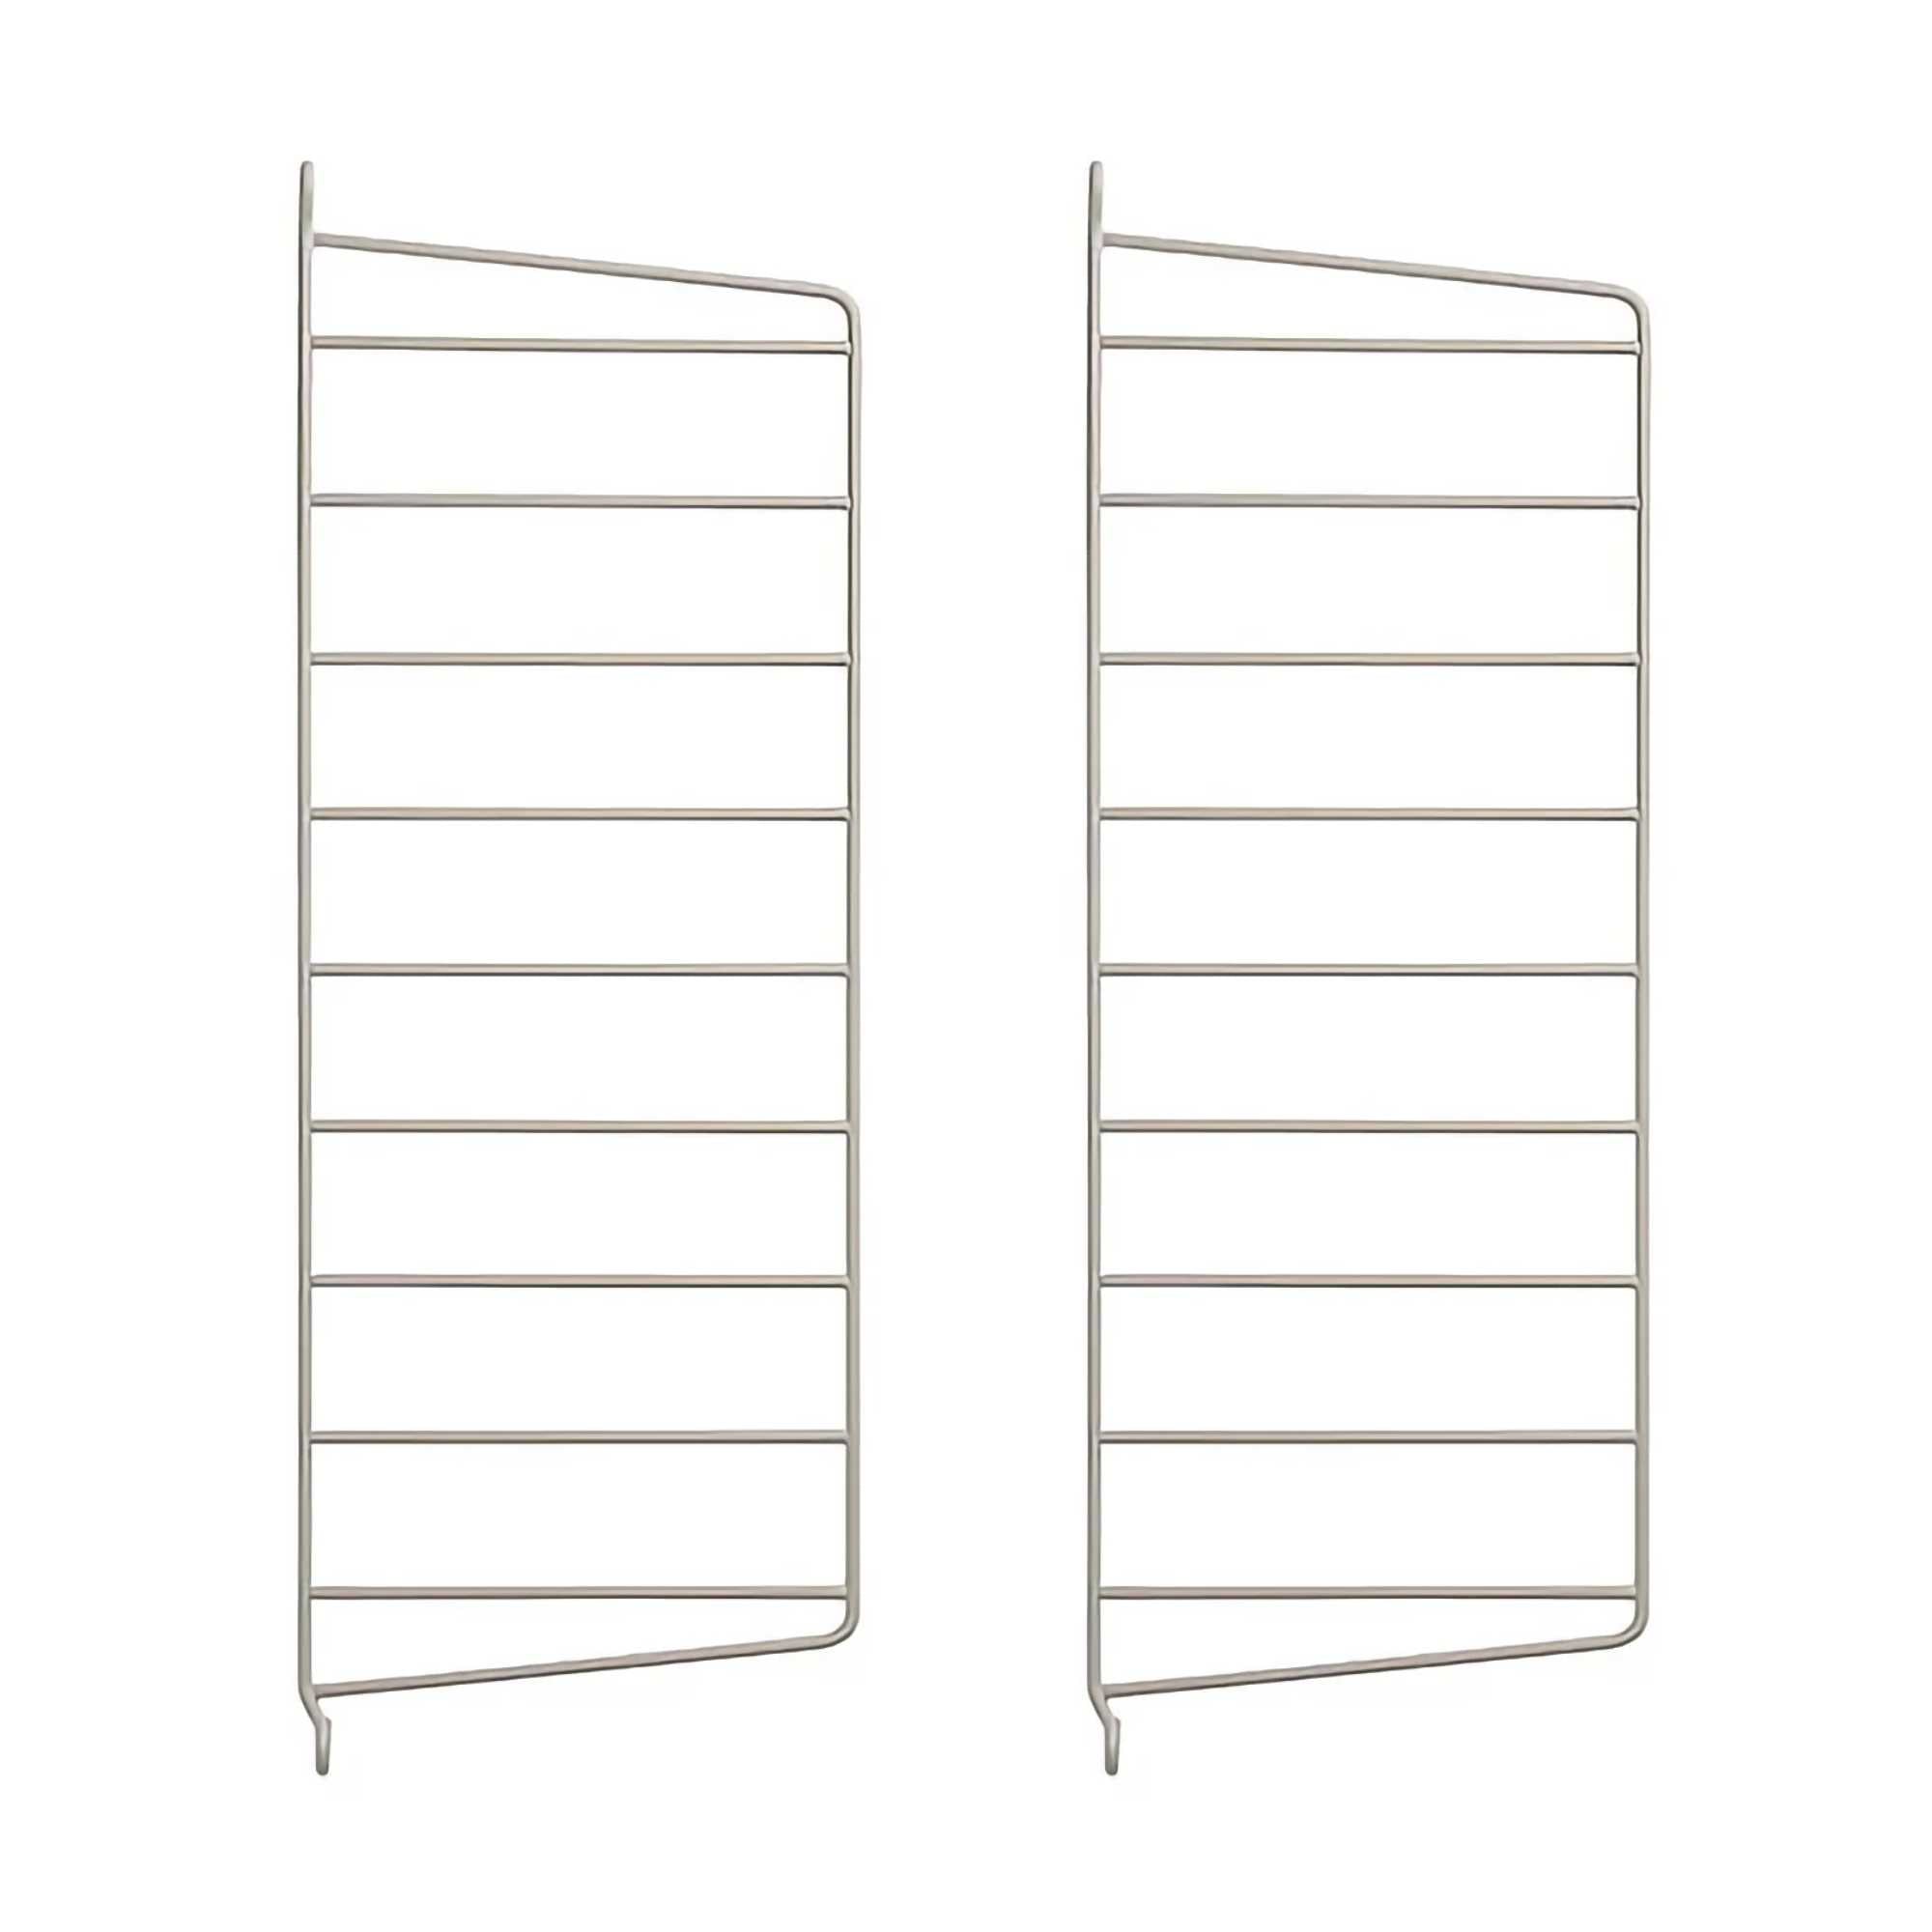 String Shelving System Wall Panels 2-Pack, Beige (d20xh50cm)